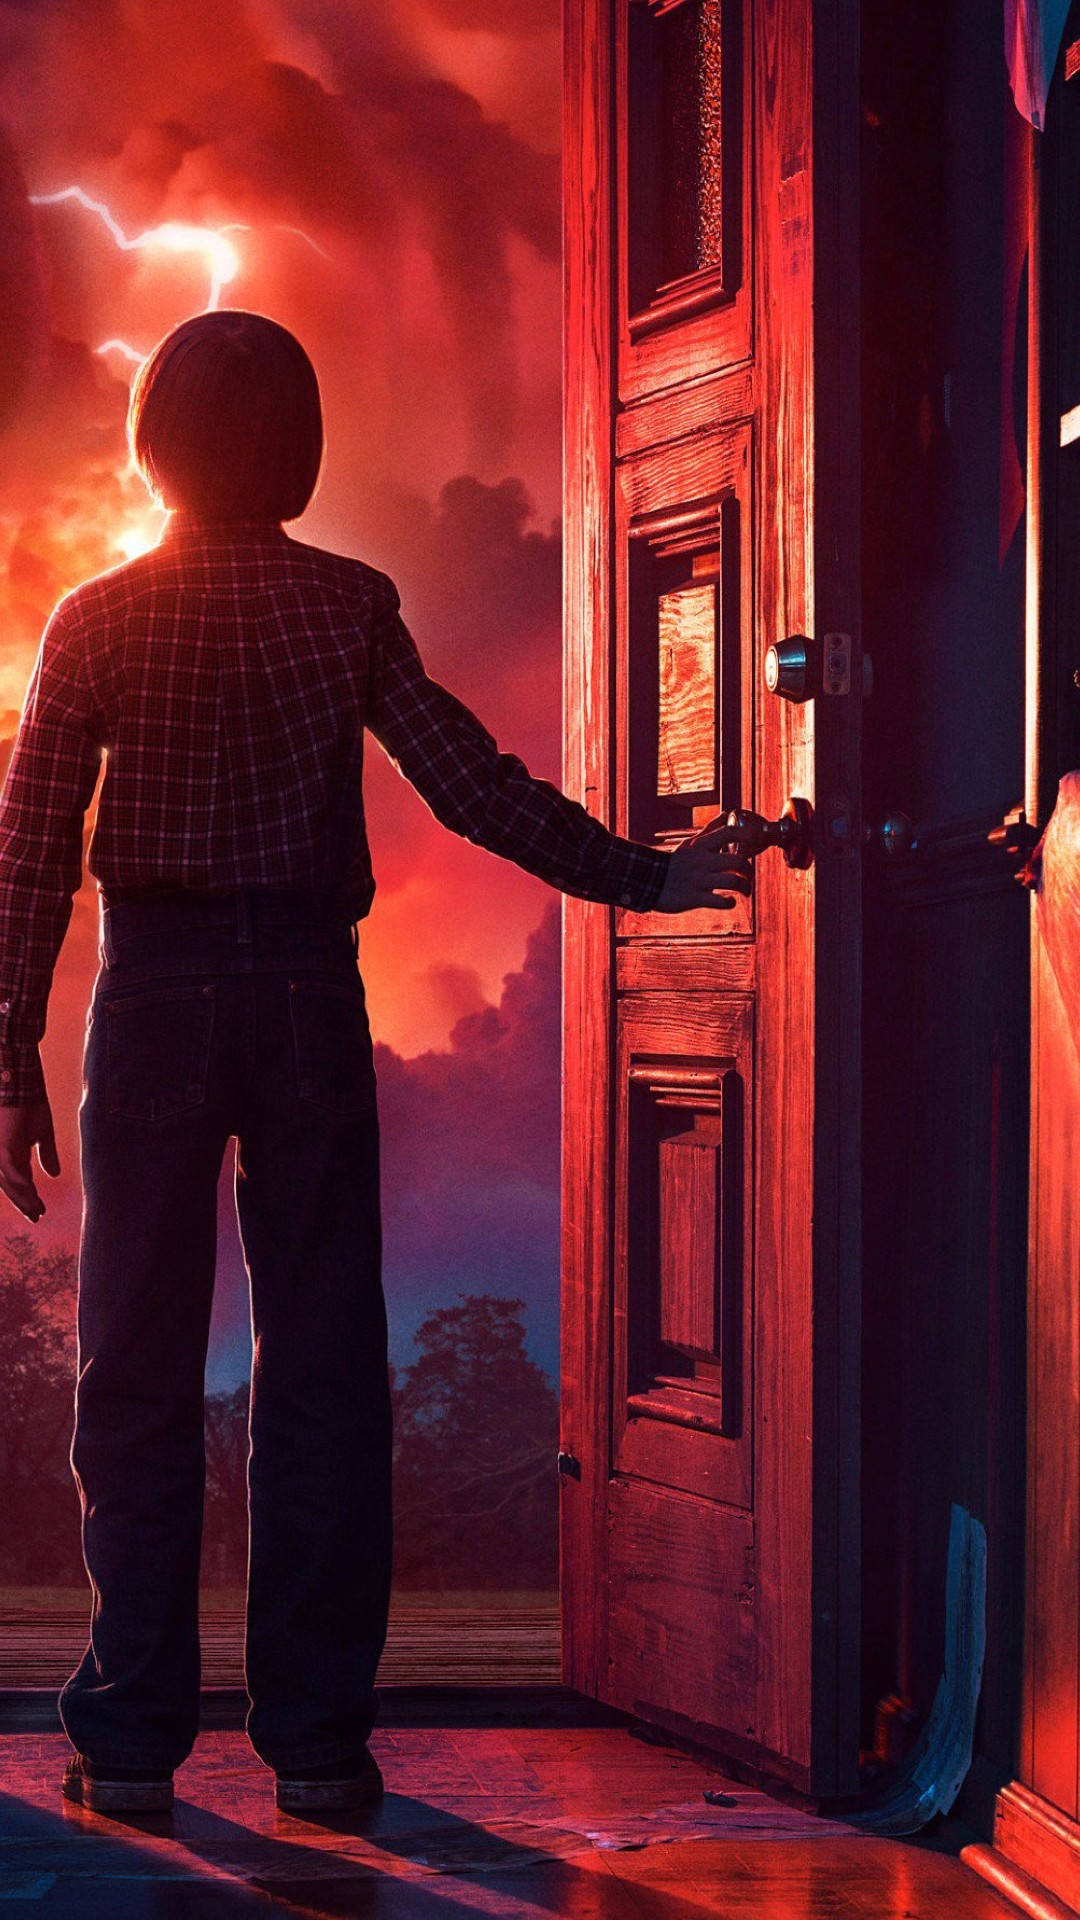 Get Lost in The World of 'Stranger Things' with an iPhone Wallpaper